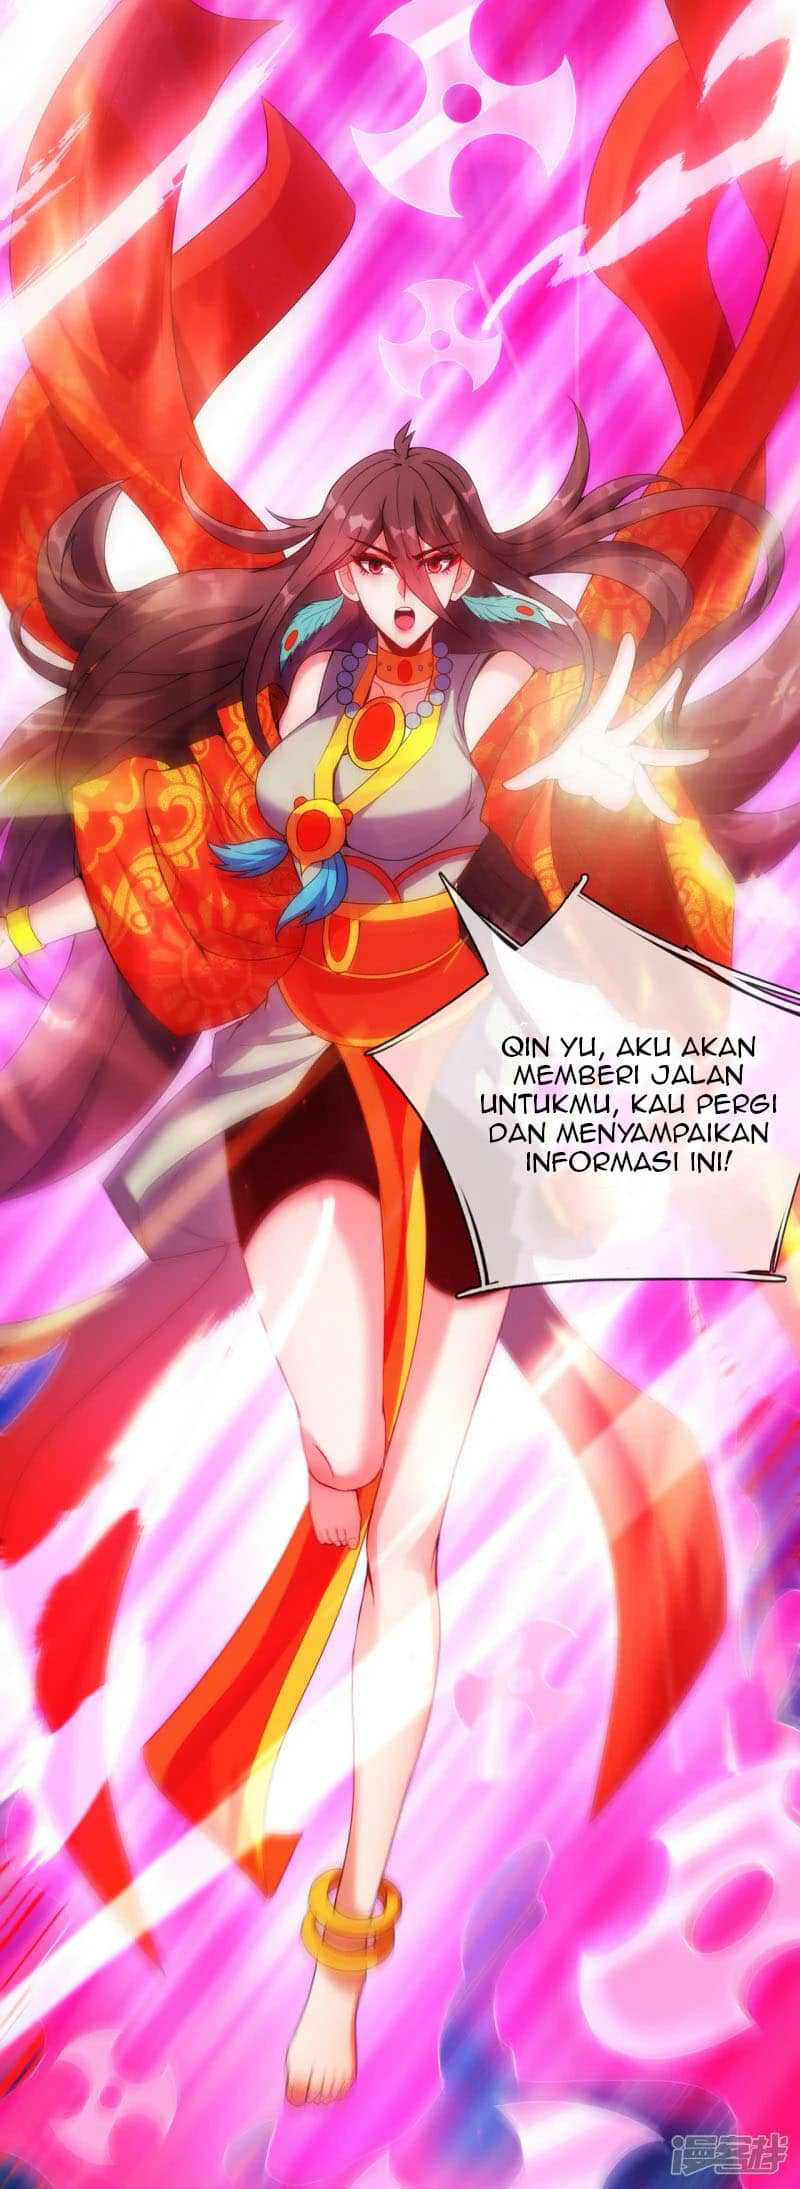 Xuantian Supreme Chapter 79